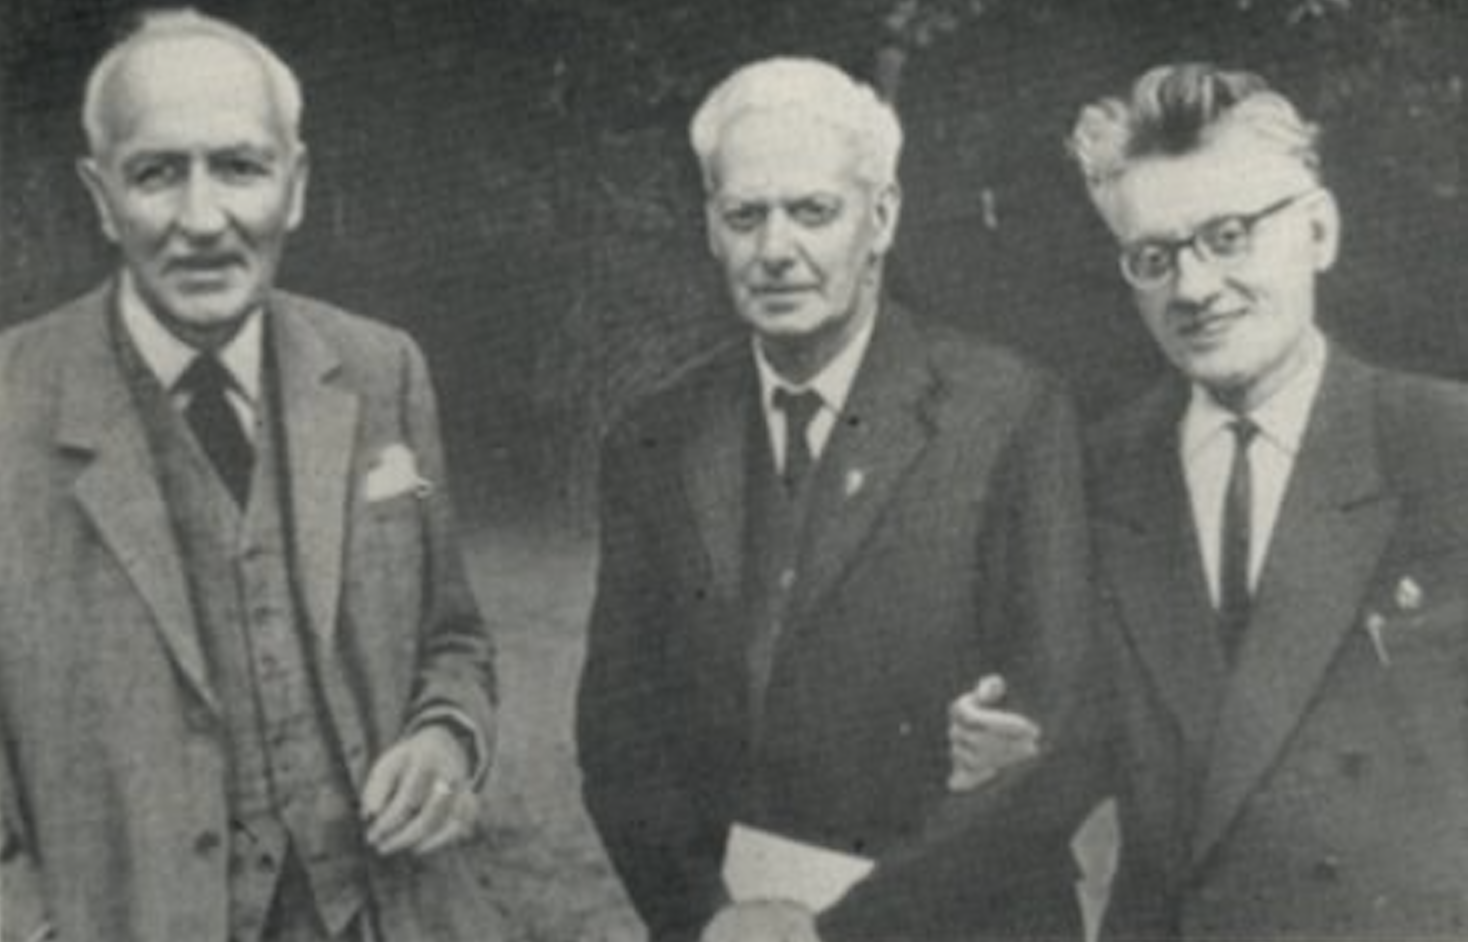 Vasily Abaev (right) with William Edward David Allen and Harold Walter Bailey (middle), (Tbilisi 1965)